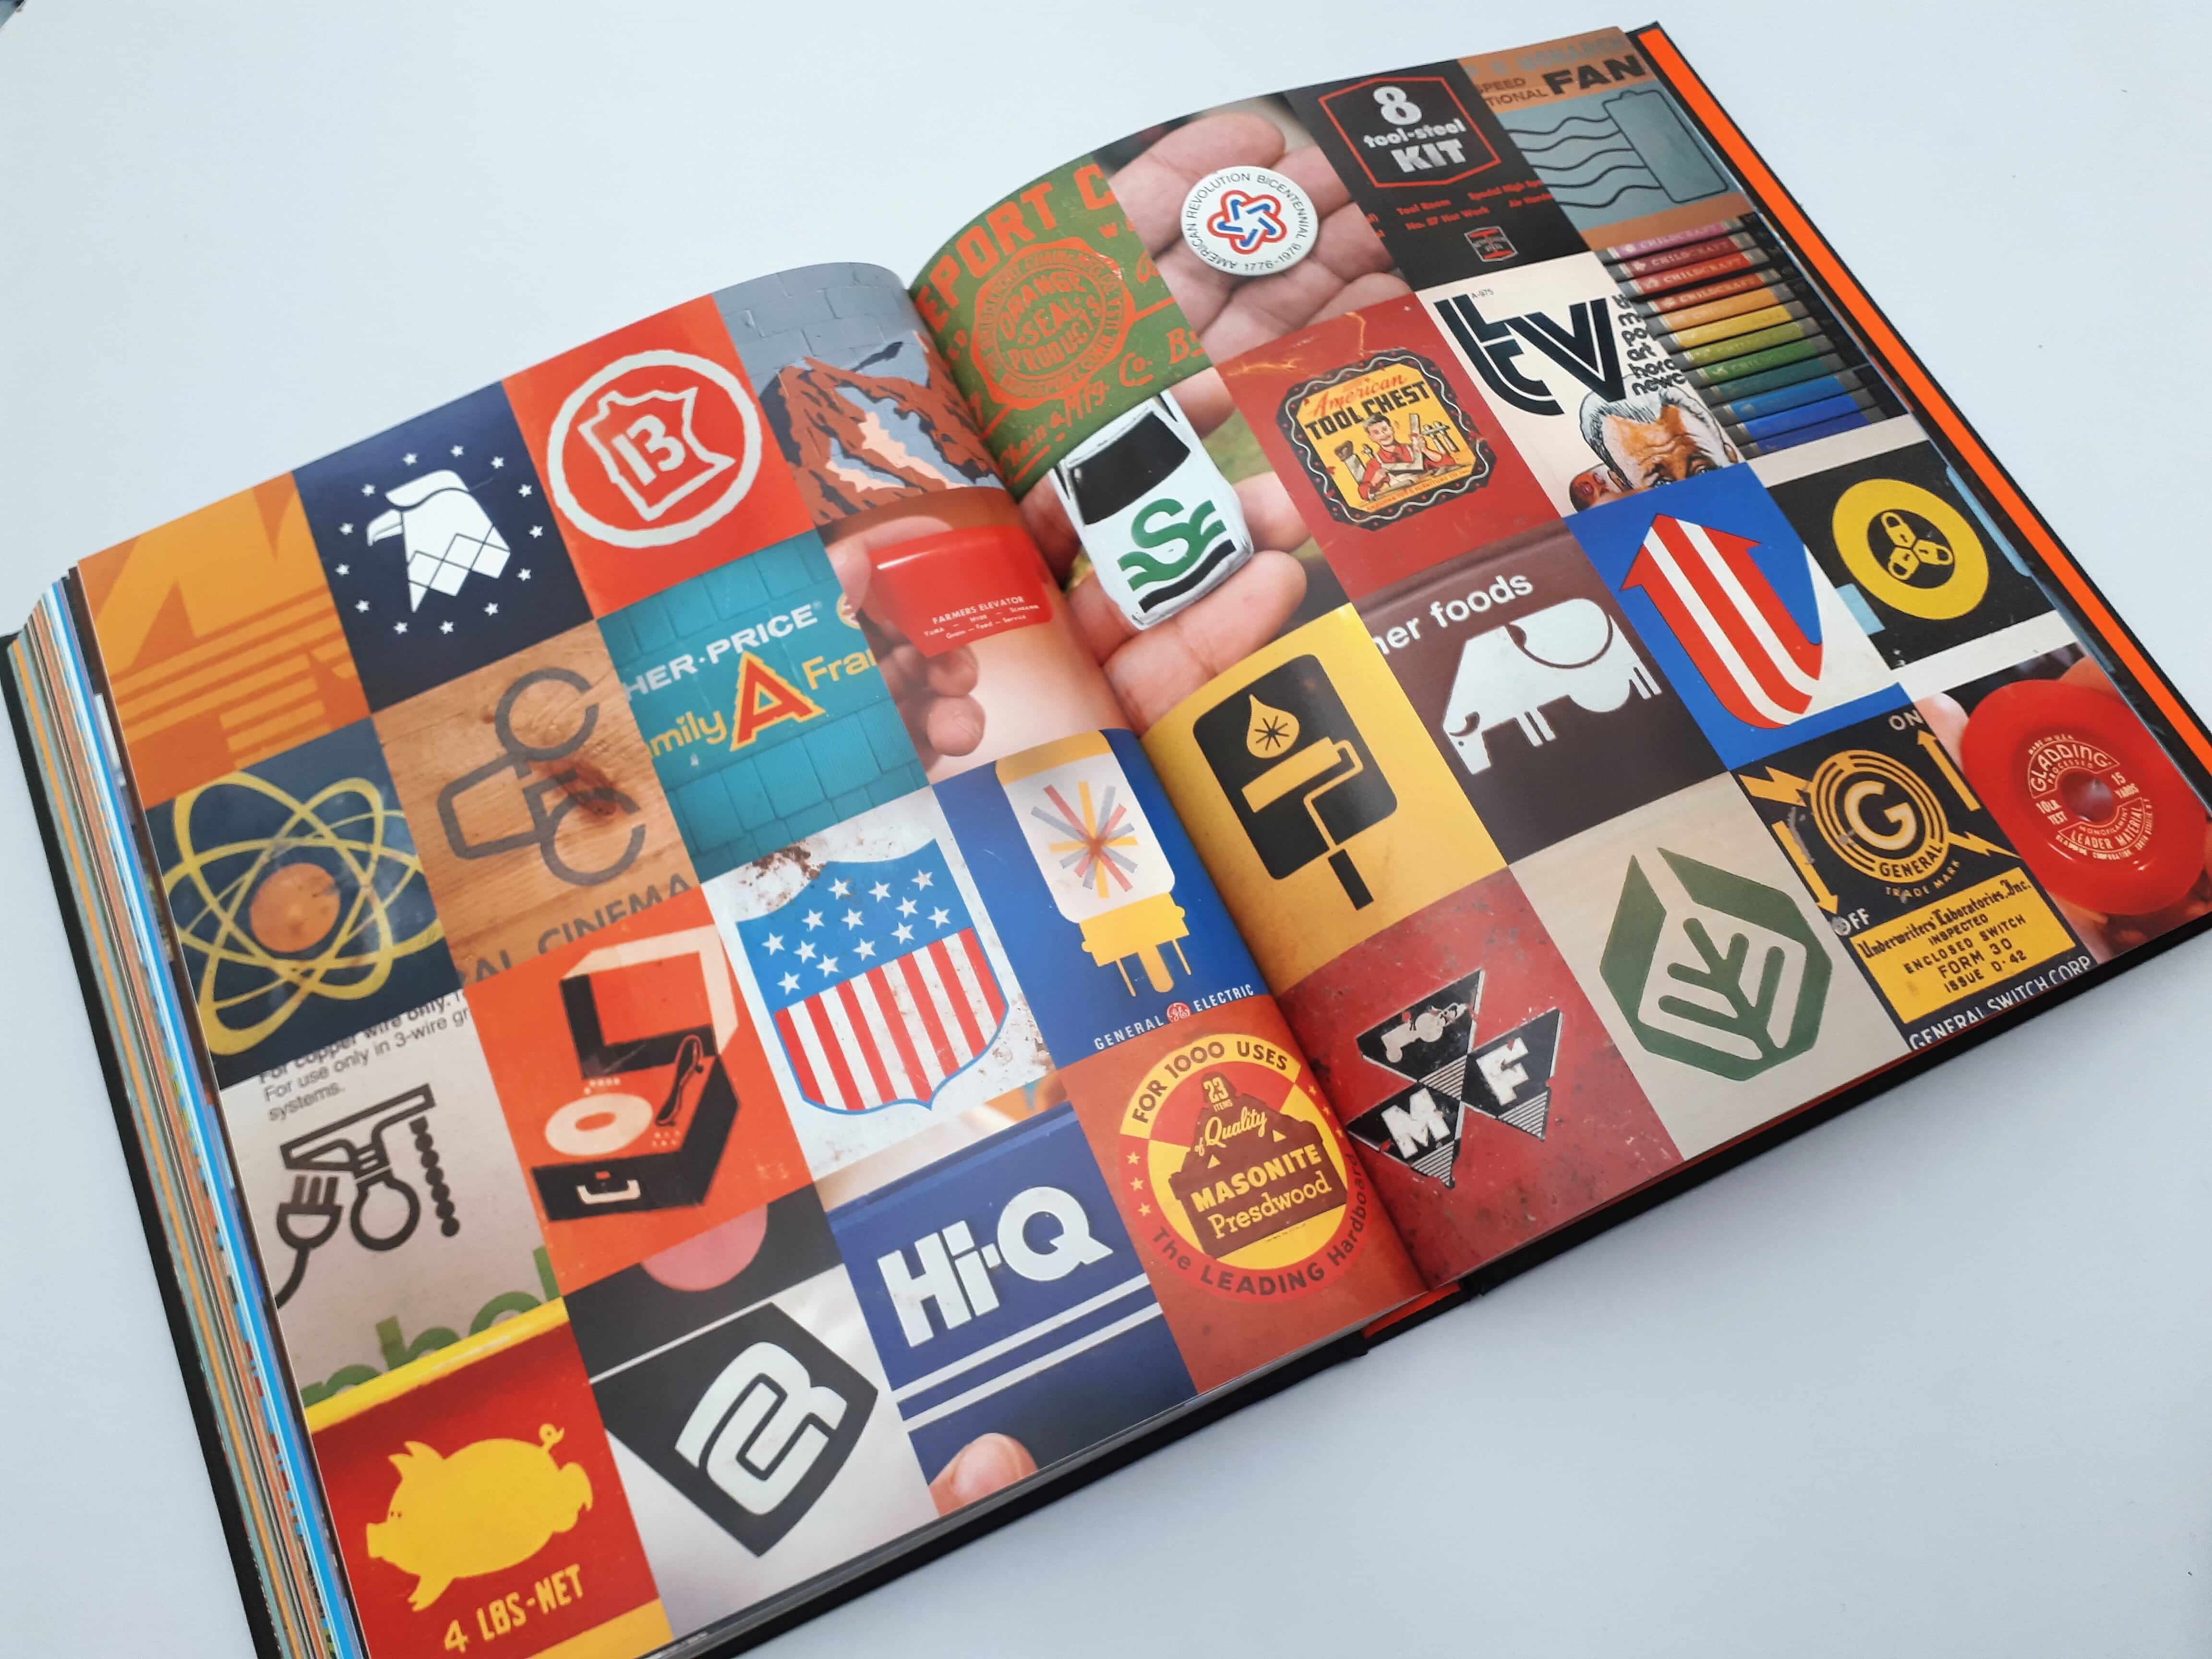 Draplin Design Co Pretty Much Everything By Aaron James Draplin Book Review,Uncommon Unique 1st Birthday Cake Designs For Baby Girl In India